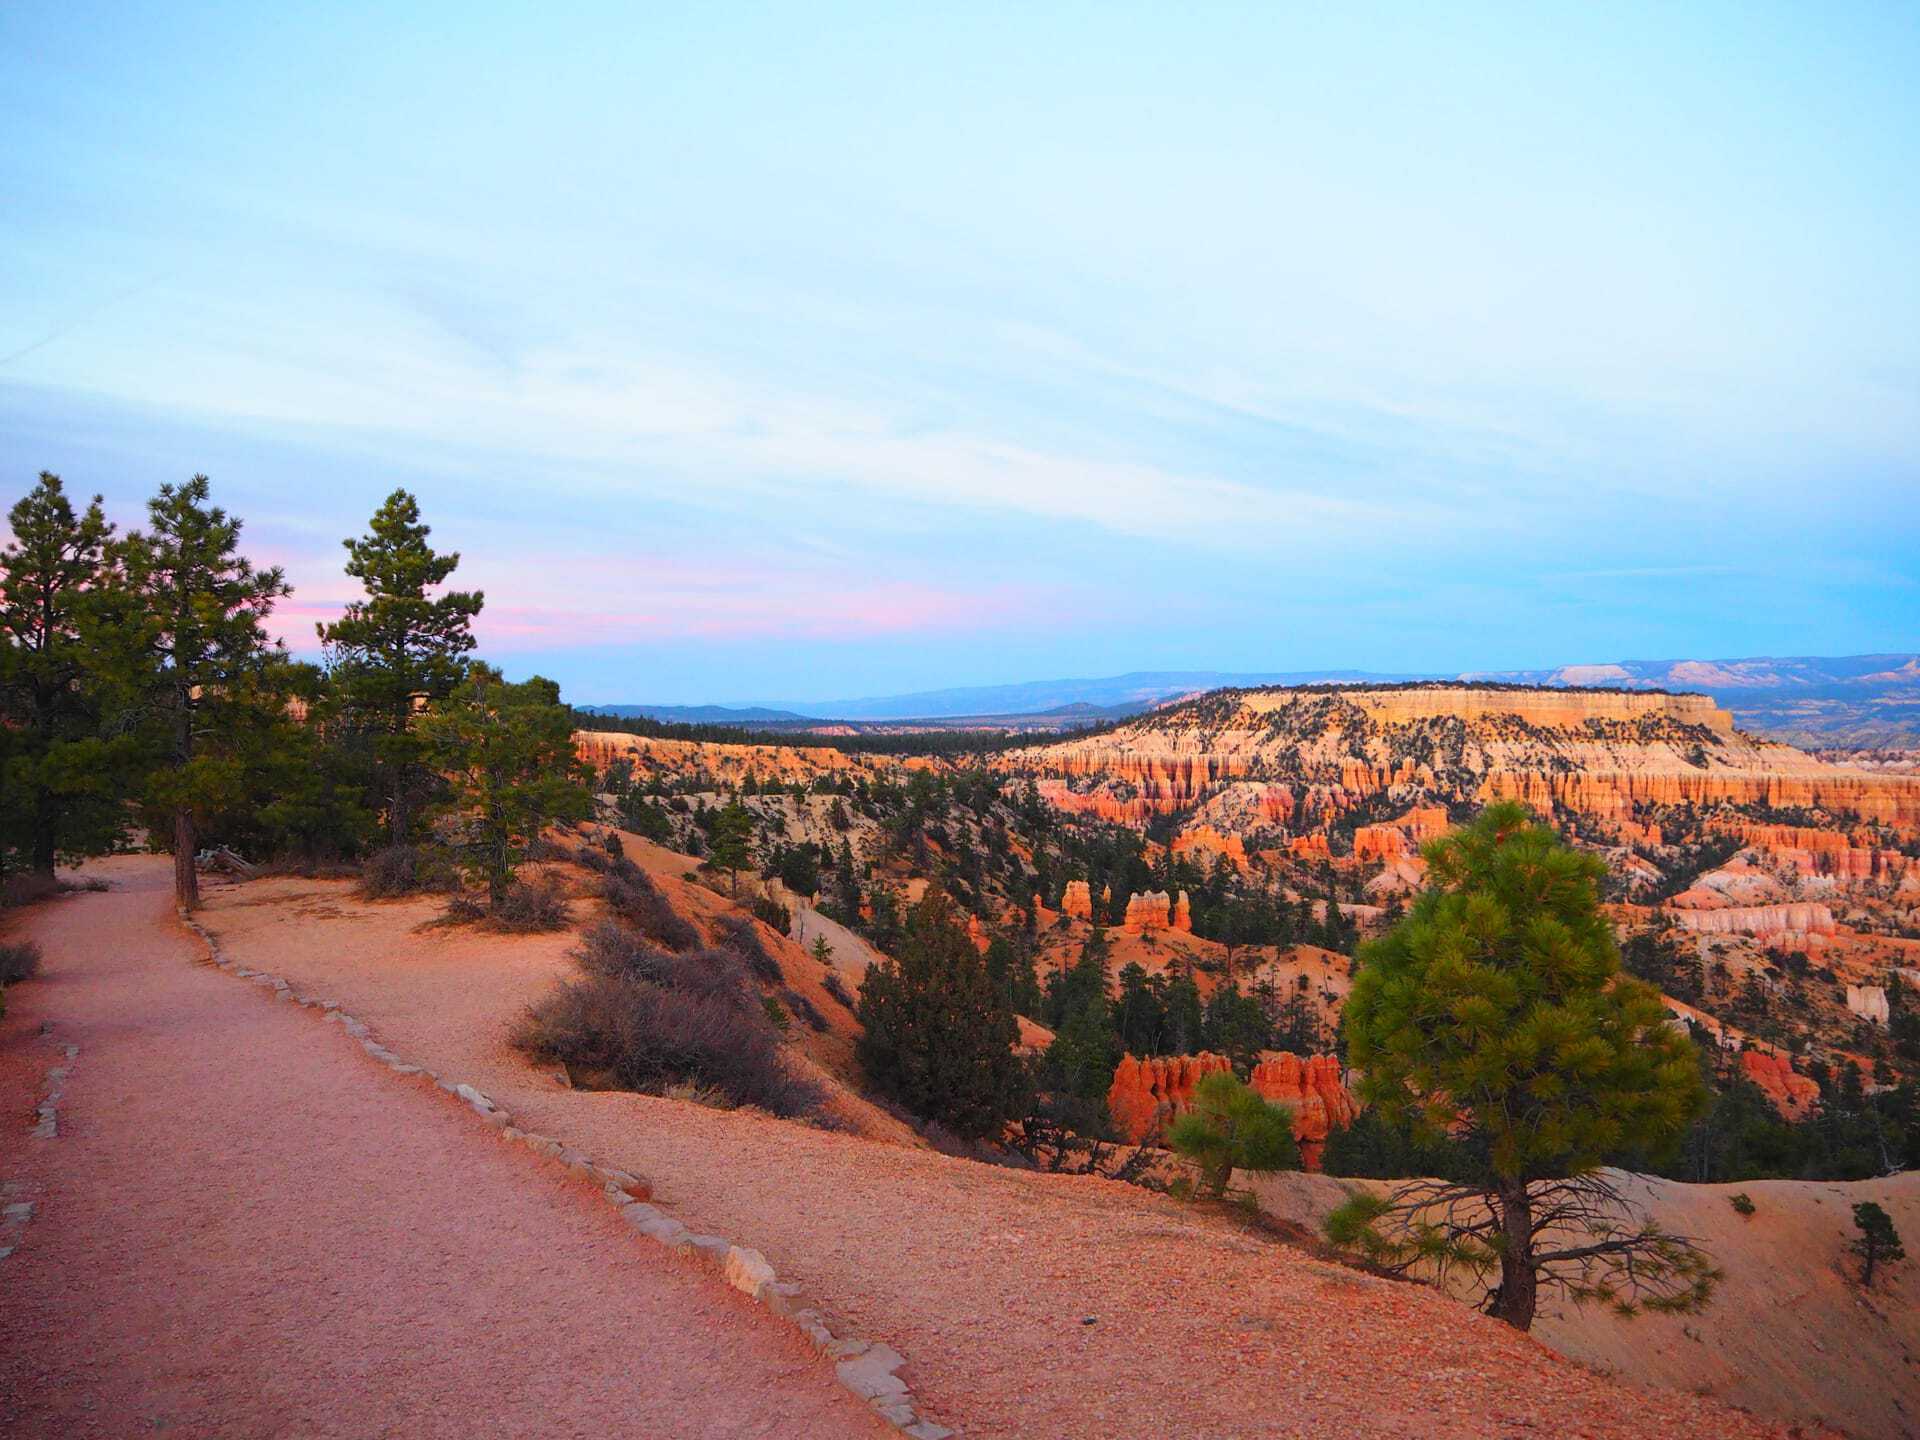 Bryce Canyon glowing as the sun sets for the evening